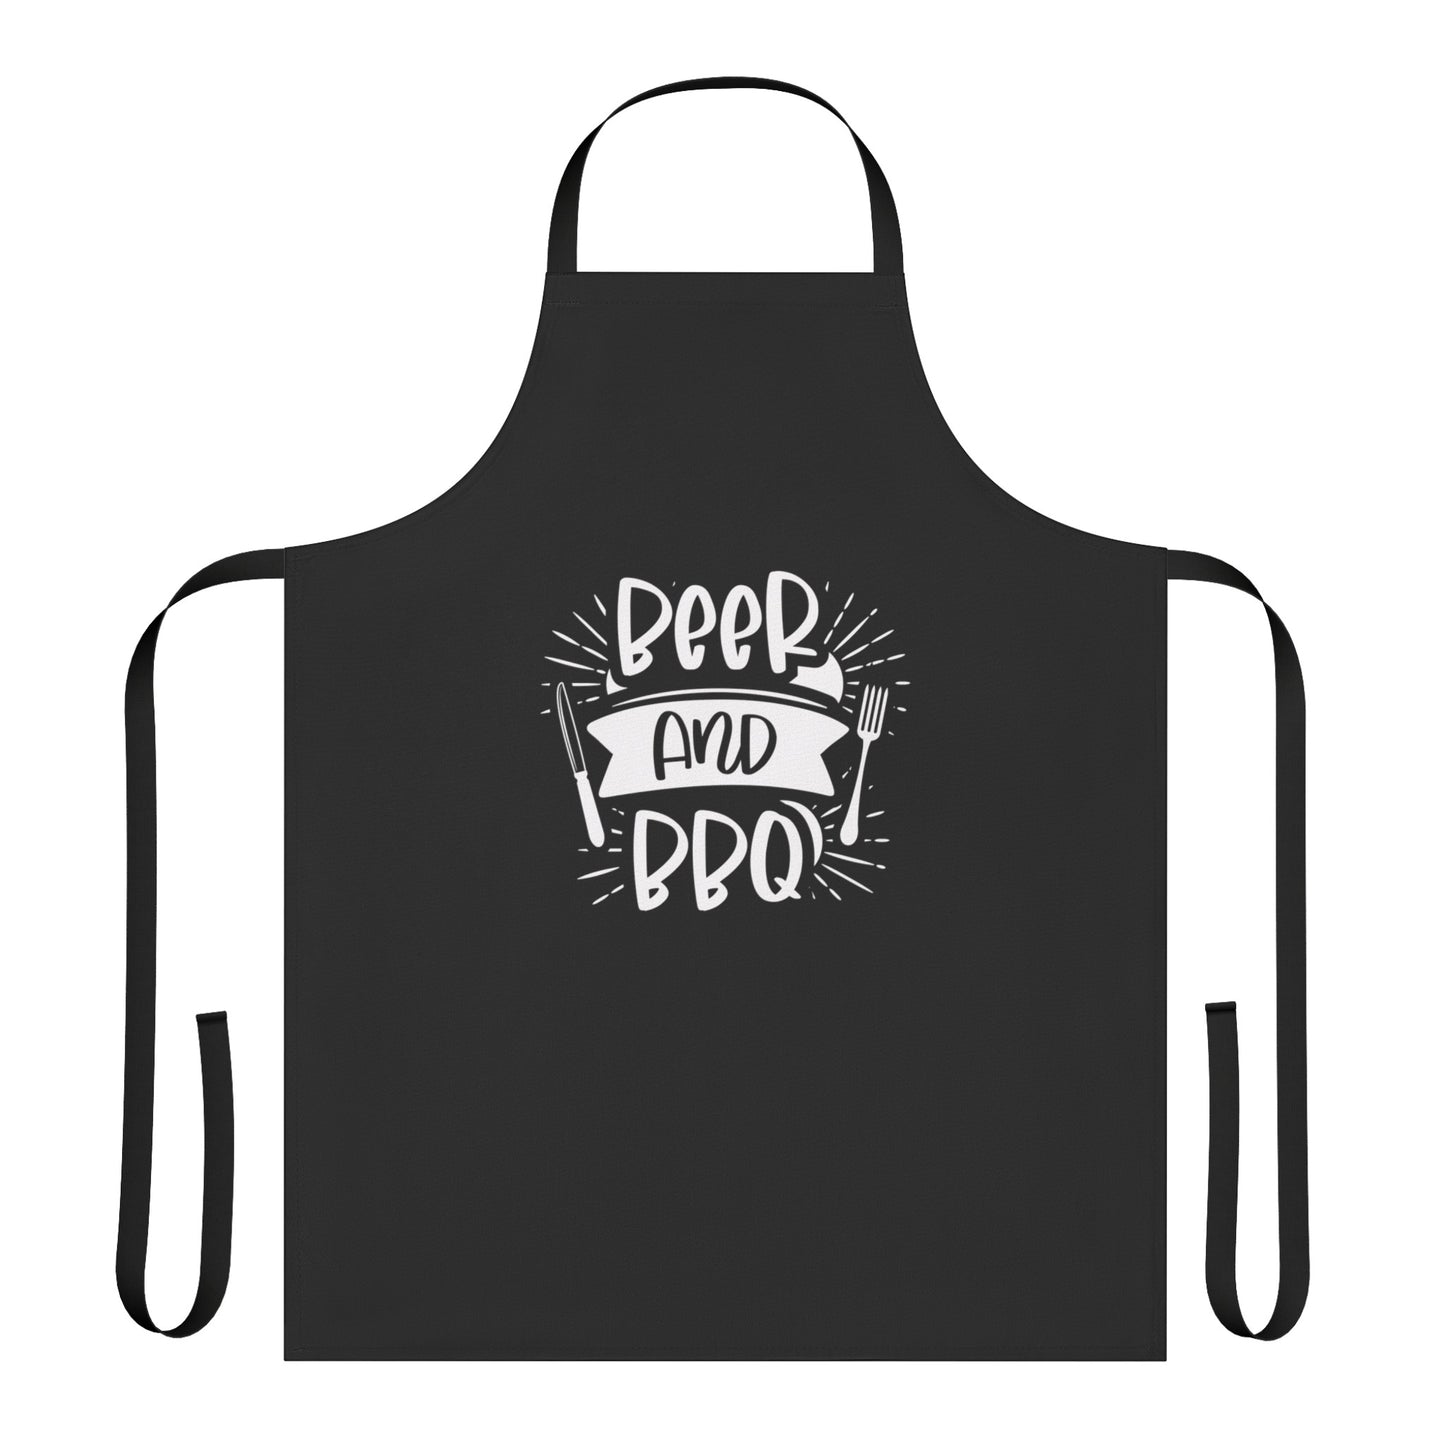 Beer and BBQ Black Apron